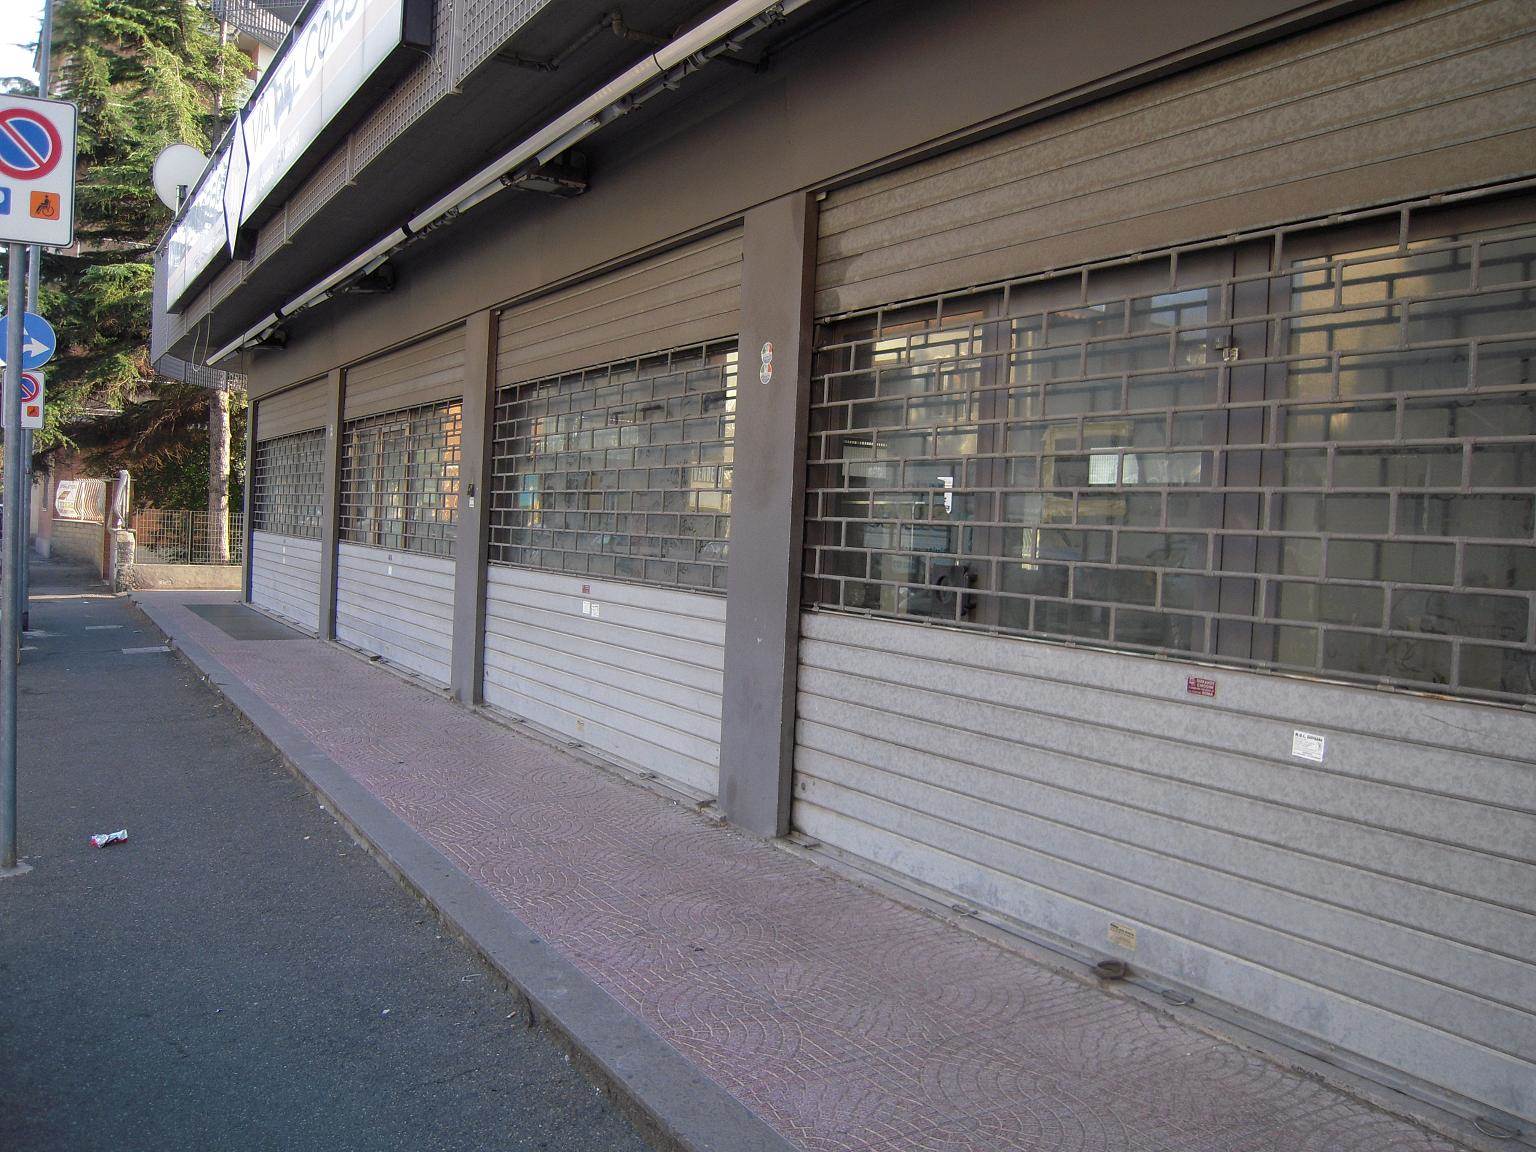 CENTRO, CIVITAVECCHIA, Store for rent of 580 Sq. mt., Heating Non-existent, placed at Ground, composed by: 3 Rooms, 3 Bathrooms, Price: € 4,500